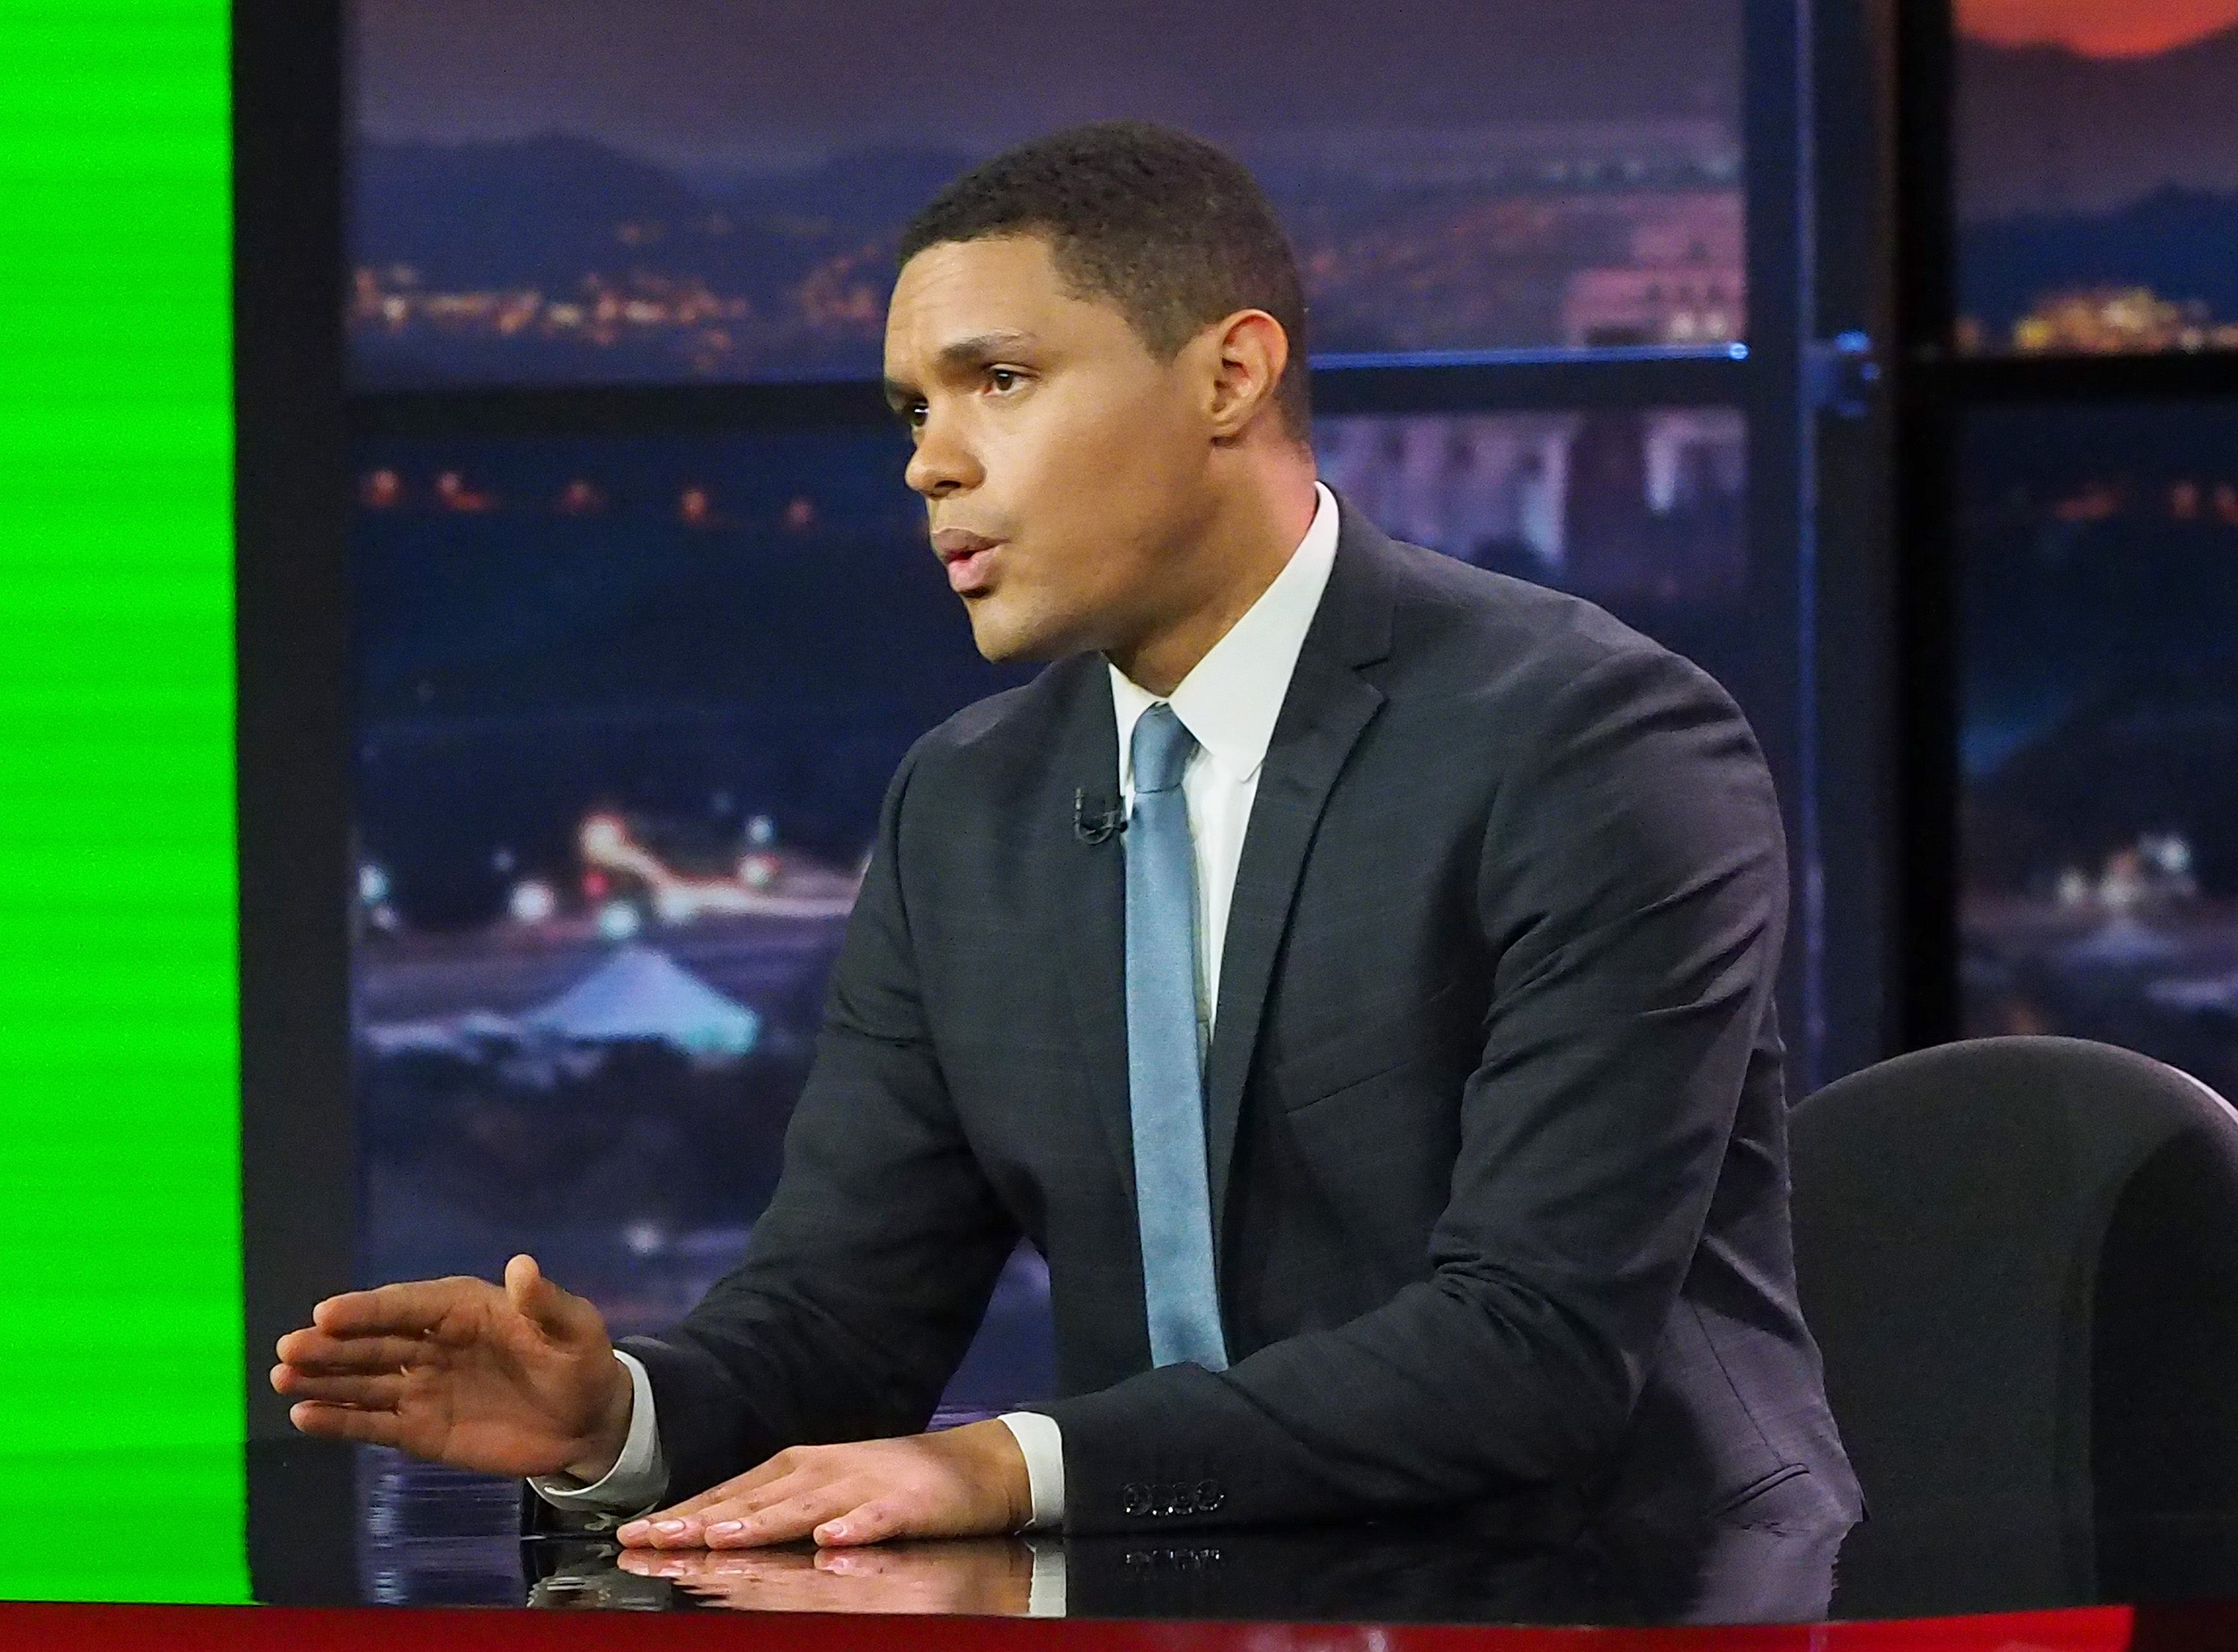 Watch ‘The Daily Show’ Host Trevor Noah Go Head-To-Head With White Supremacist Fave Tomi Lahren